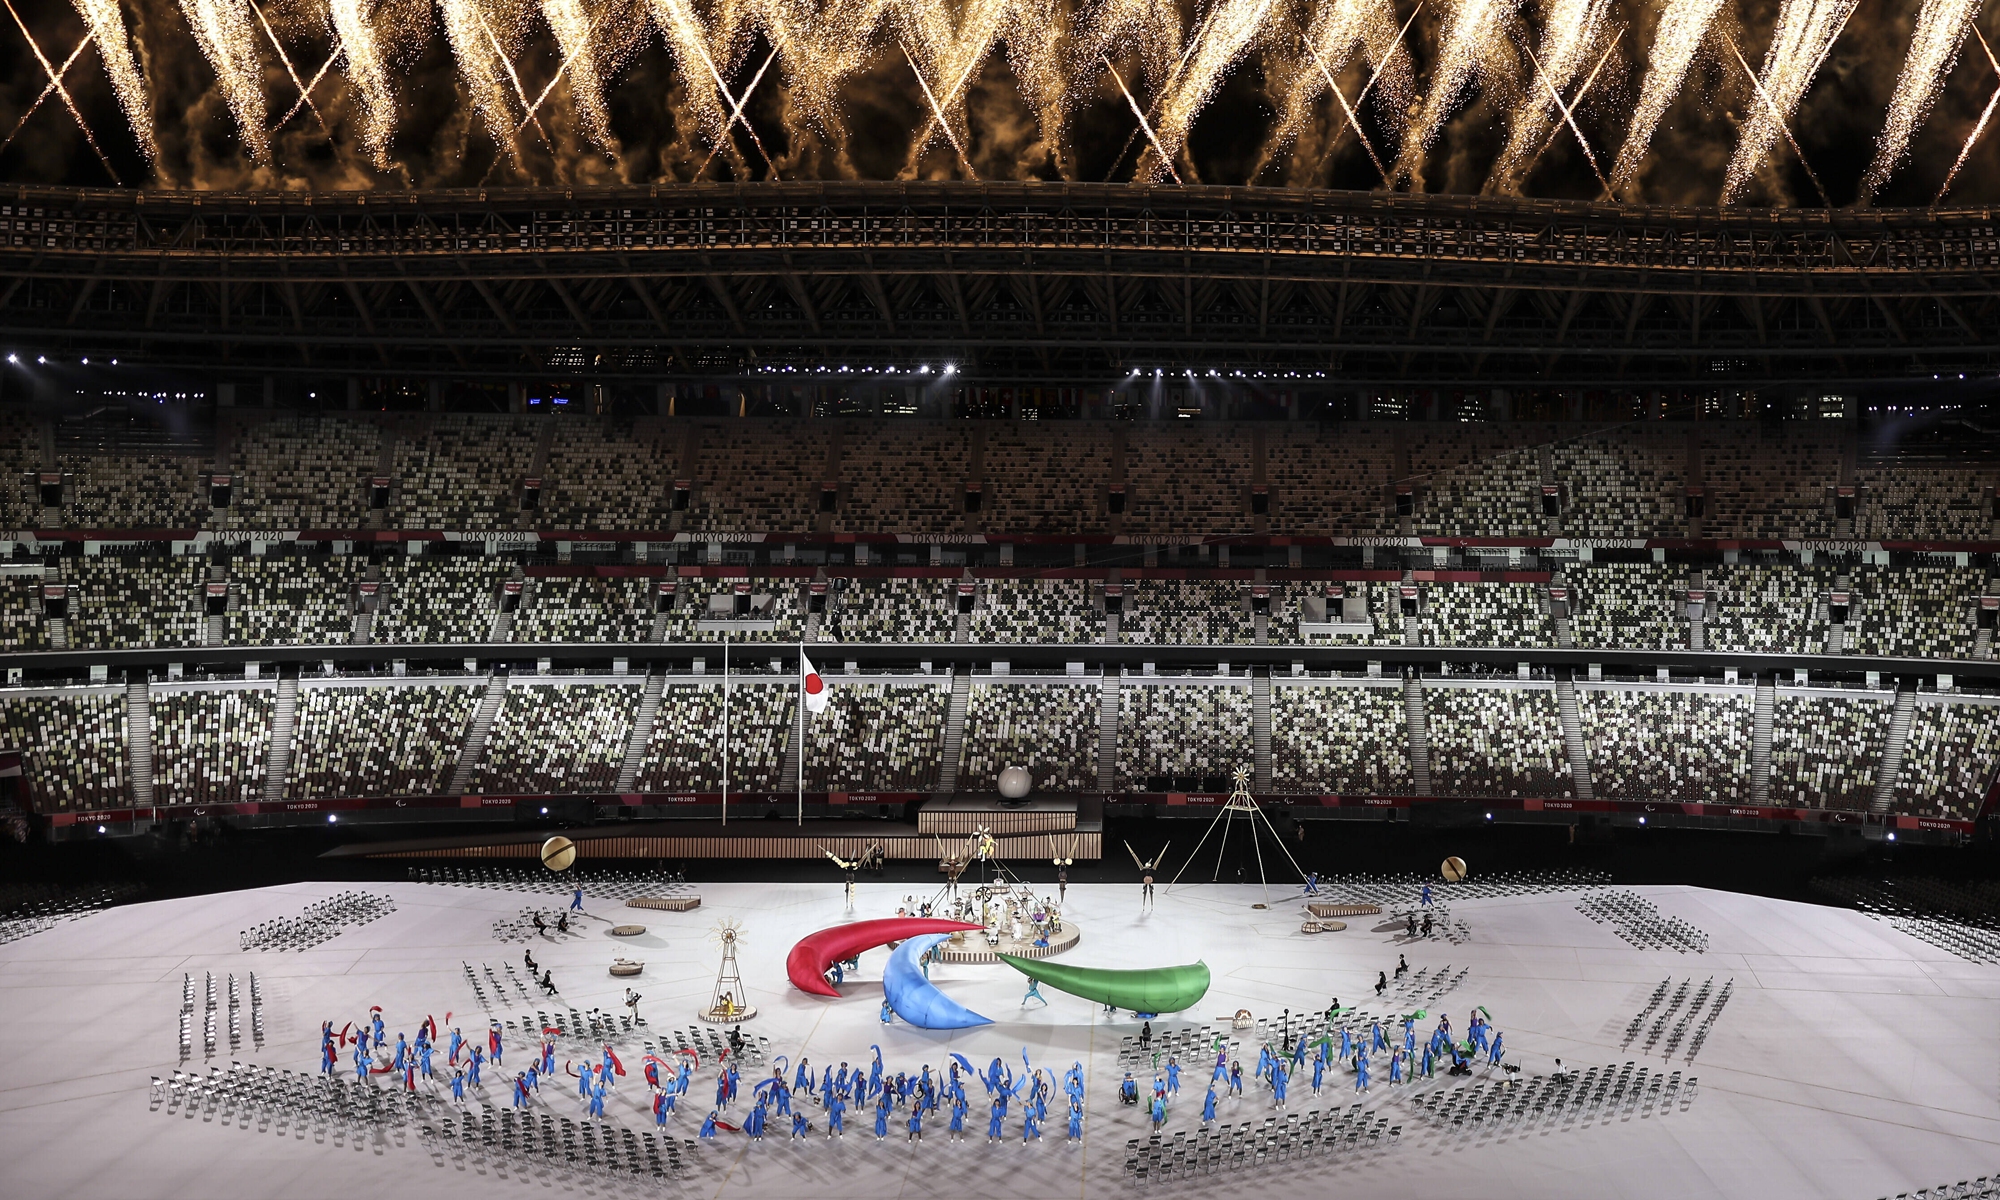 Performers dance during the opening ceremony of the Tokyo 2020 Paralympic Games at the Olympic Stadium on Tuesday in Tokyo, Japan (See story on Page 24). Photo: VCG